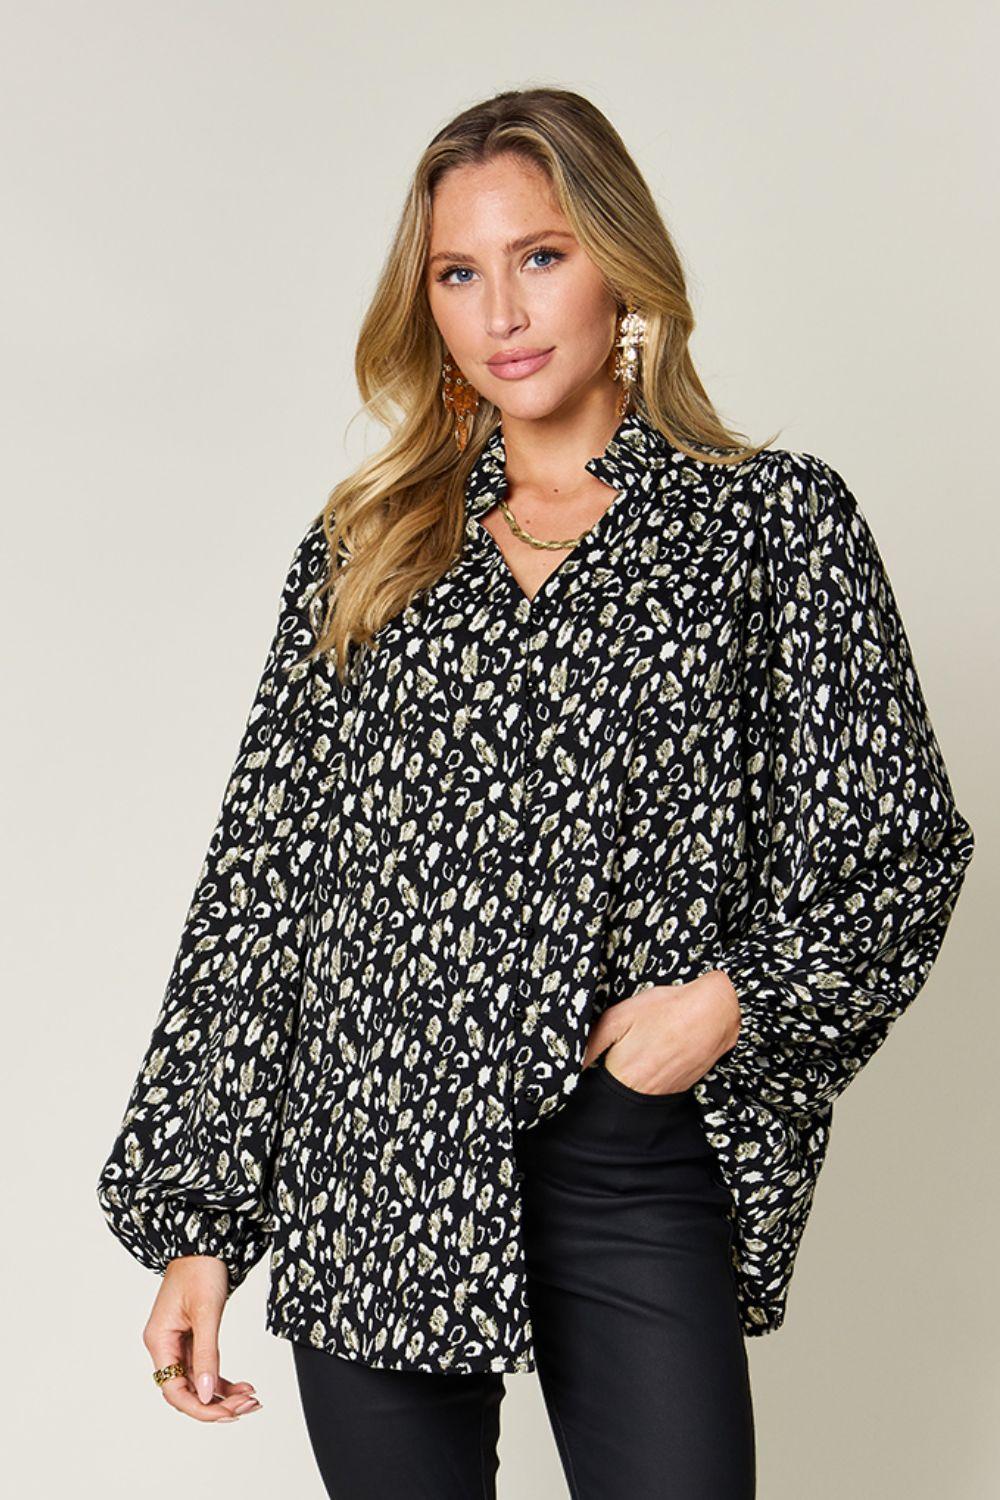 Double Take Full Size Leopard Long Sleeve Blouse Black Shirts & Tops